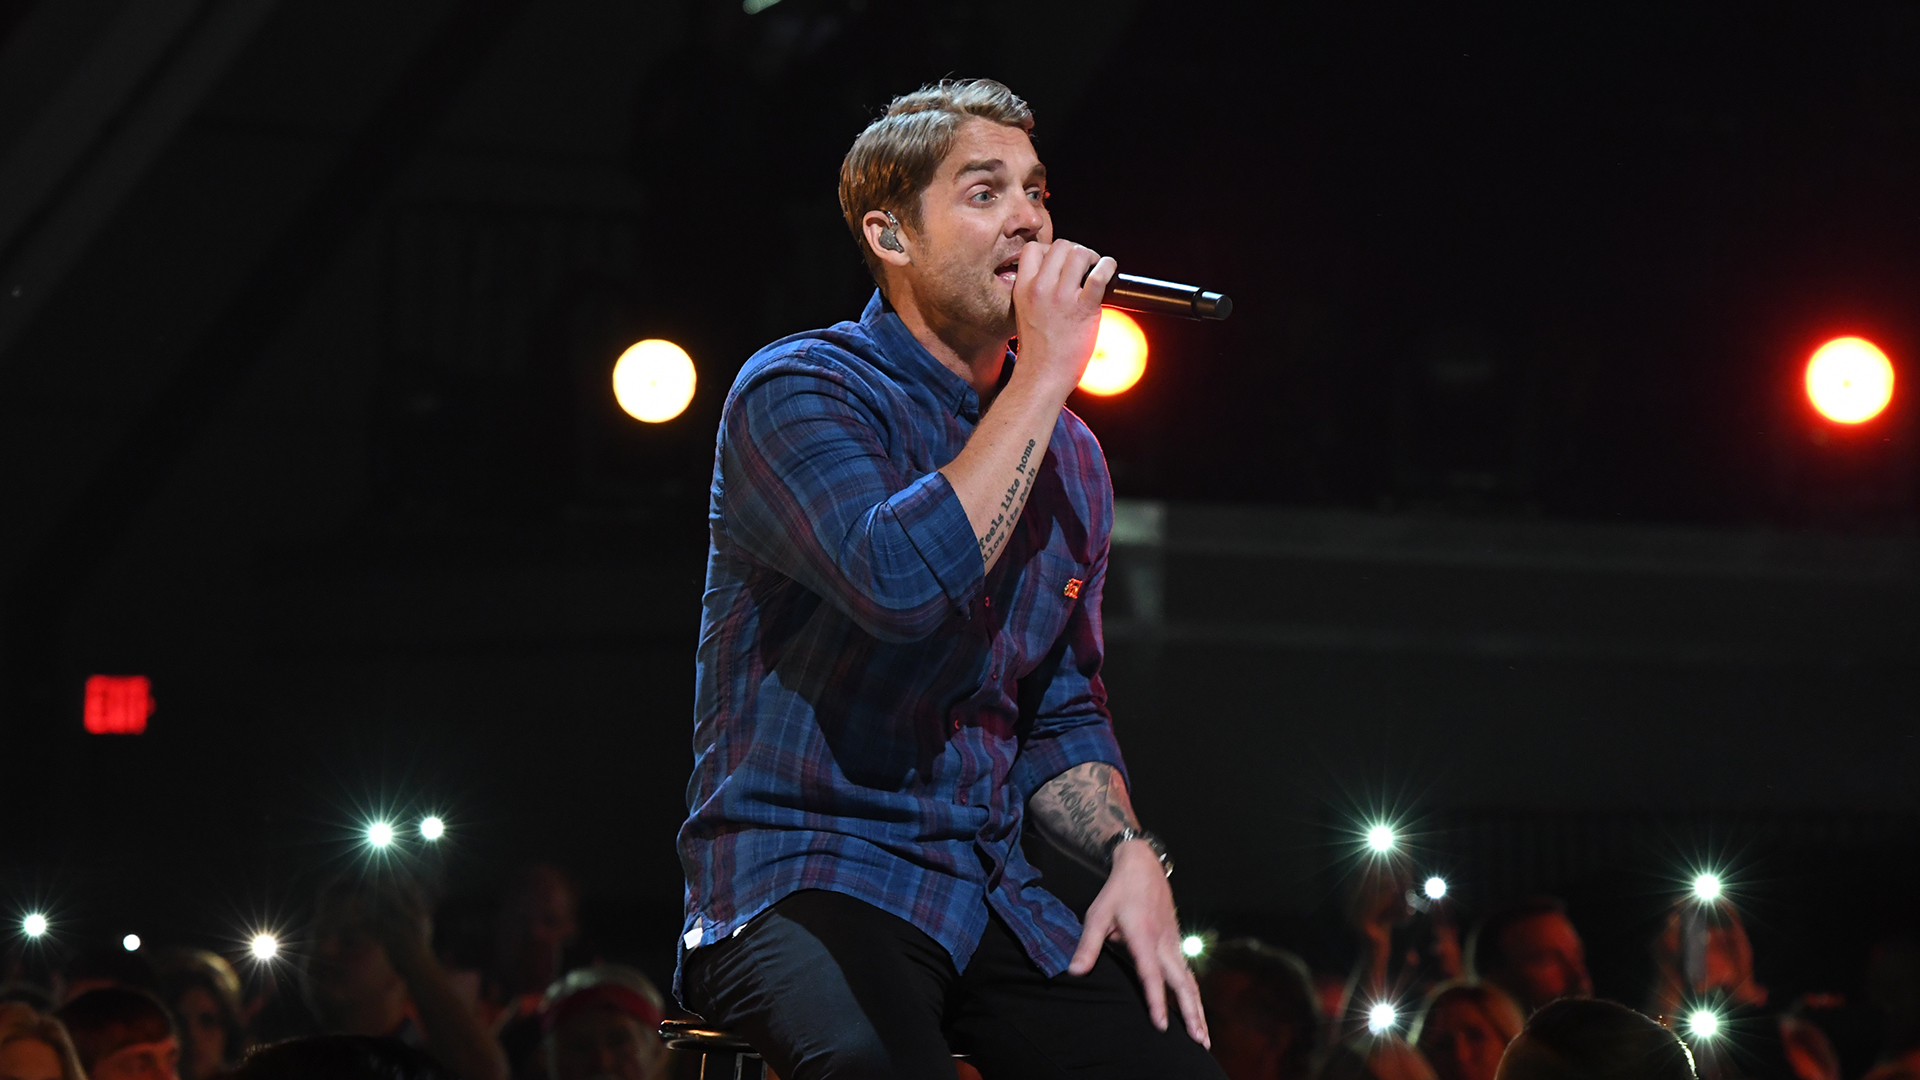 New Male Vocalist of the Year winner Brett Young jumps onstage to play 